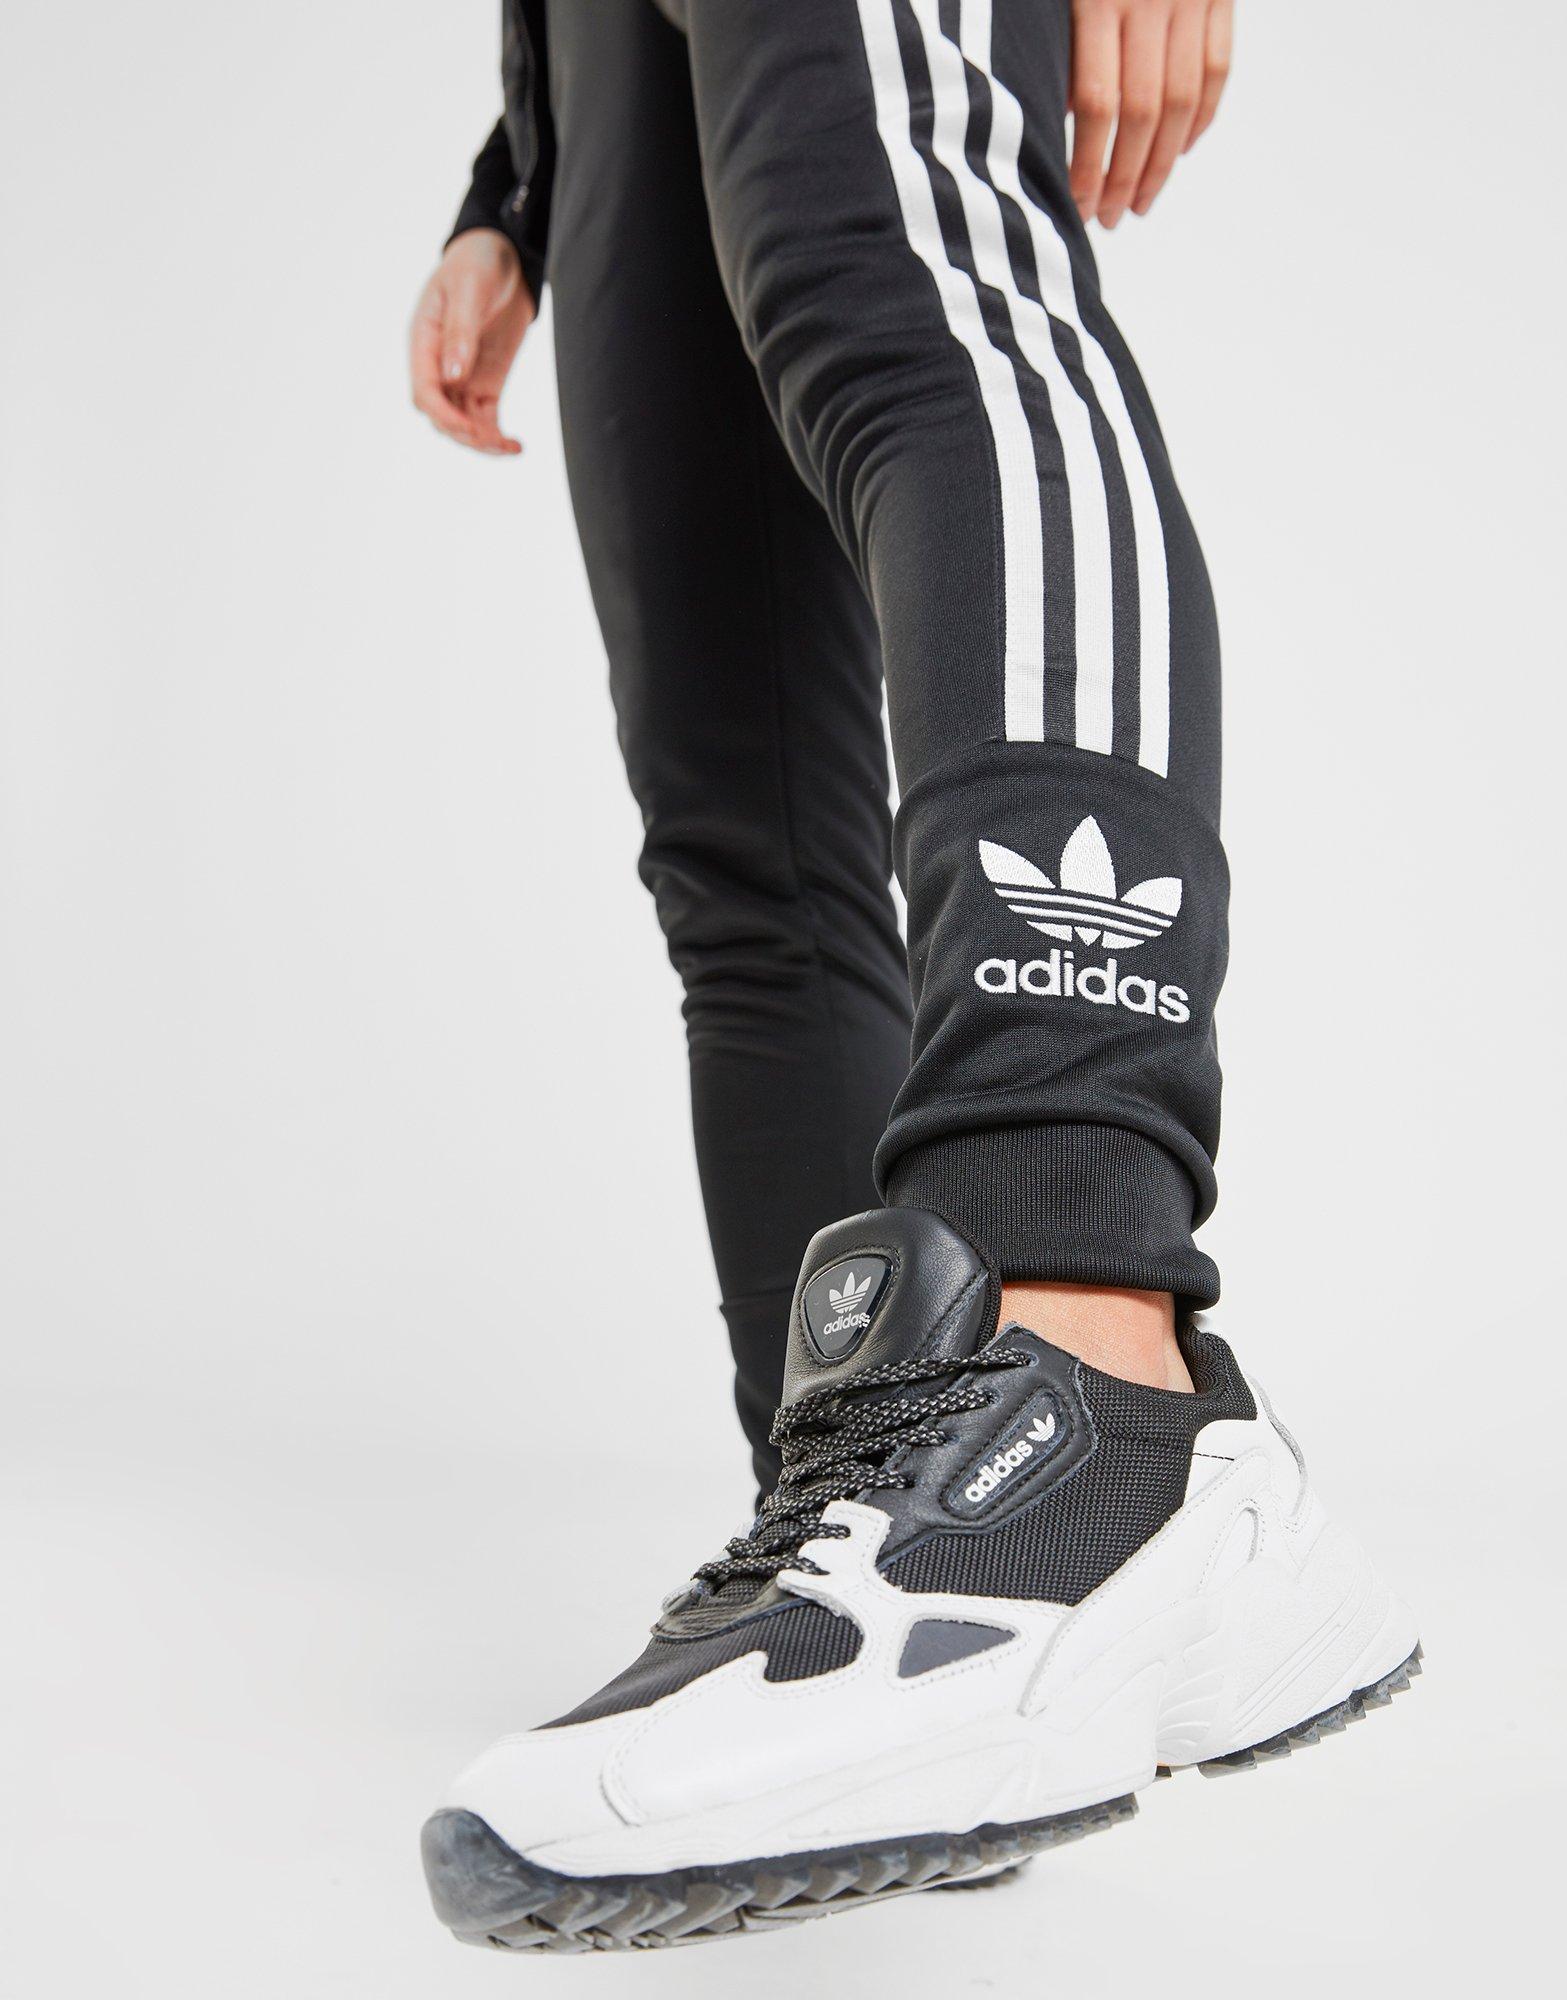 adidas pants and shoes